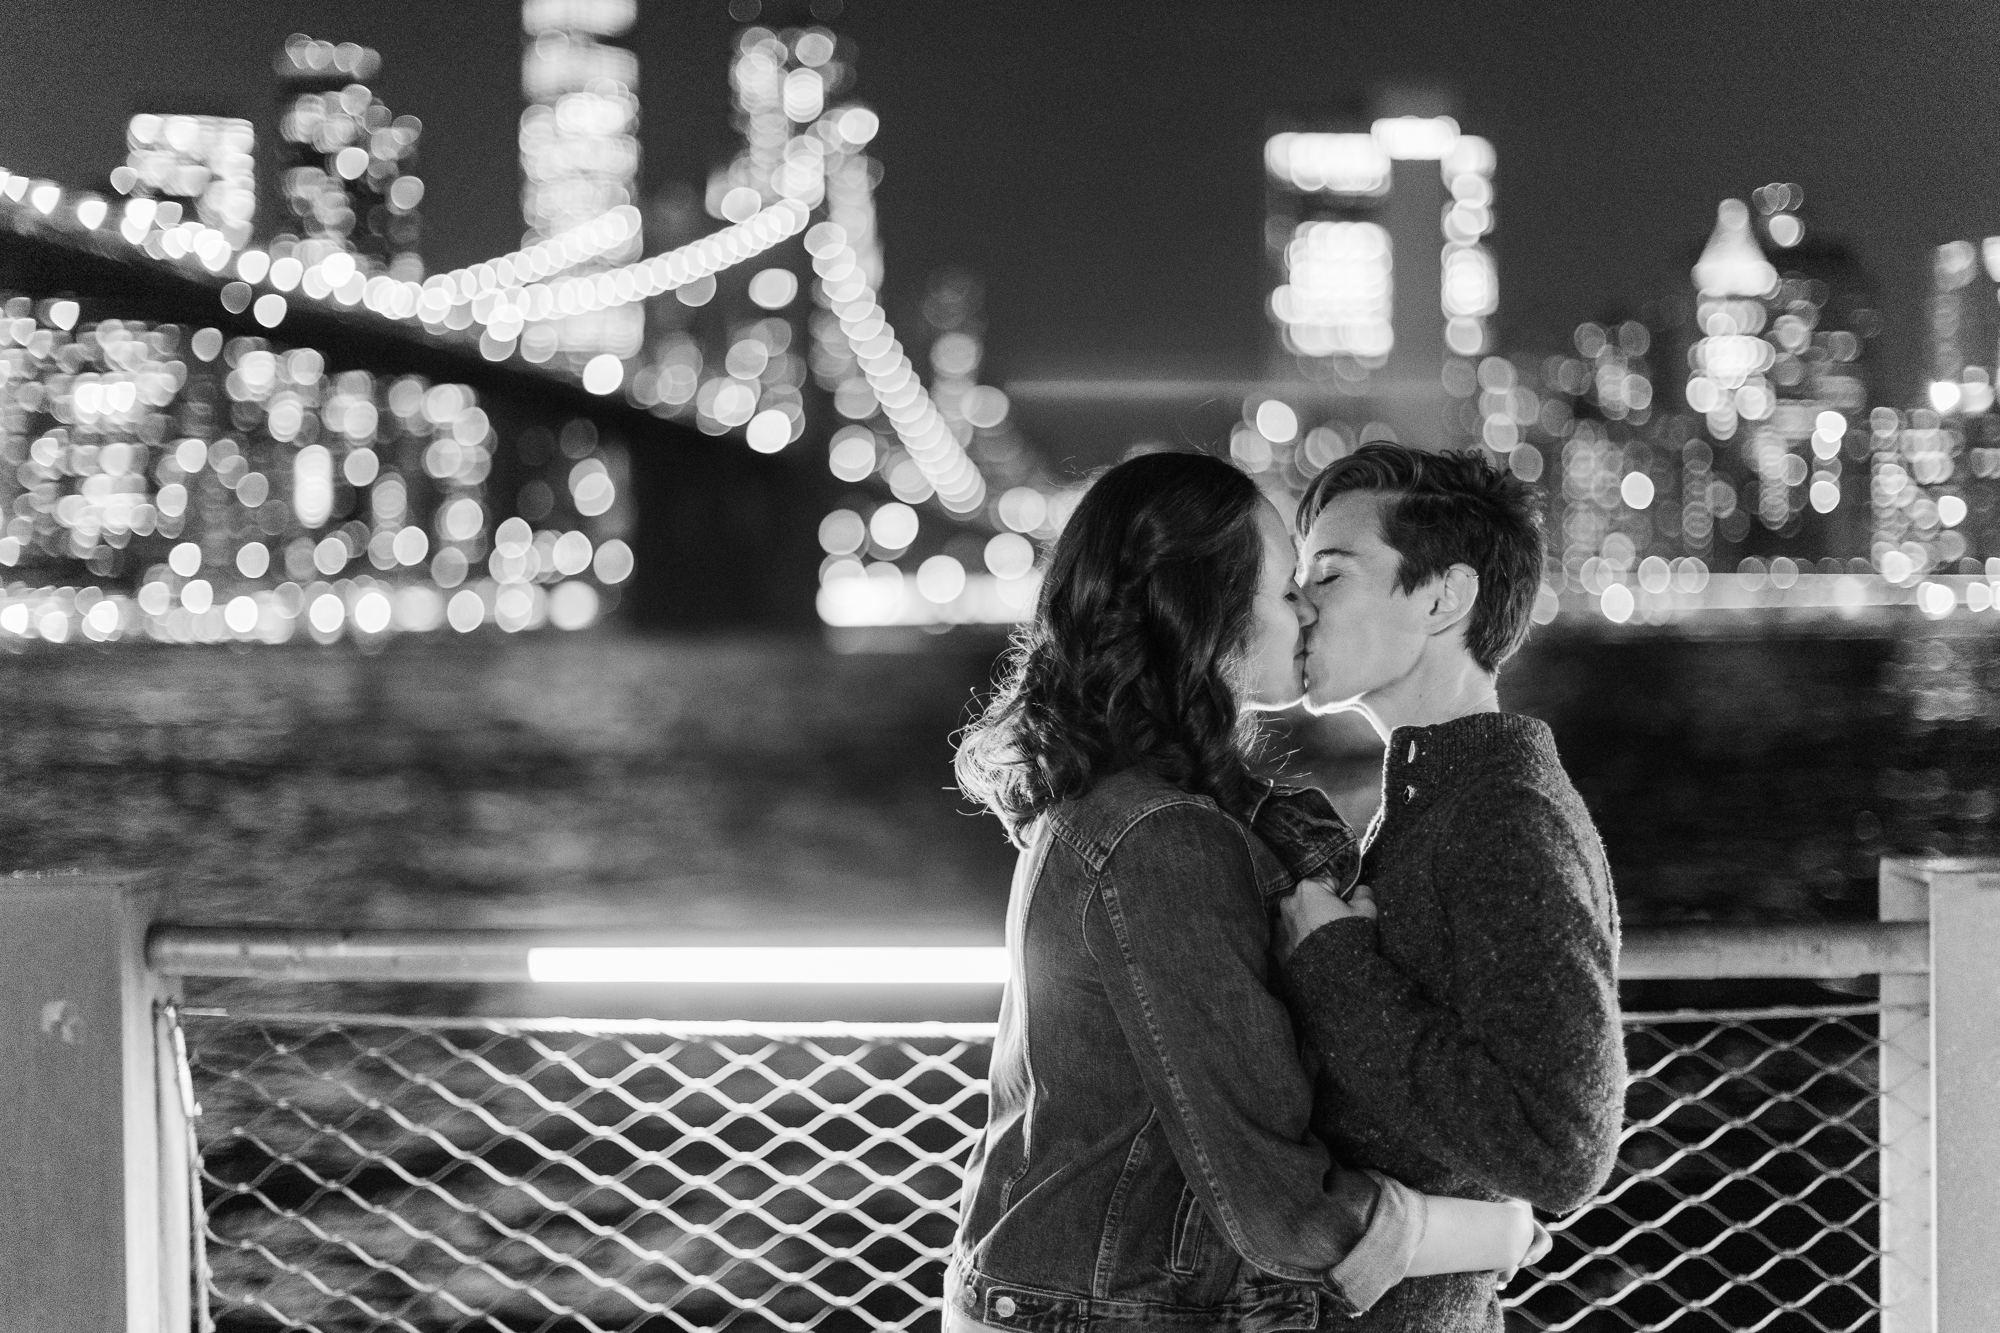 Vibrant DUMBO Engagement Photo Shoot in NYC